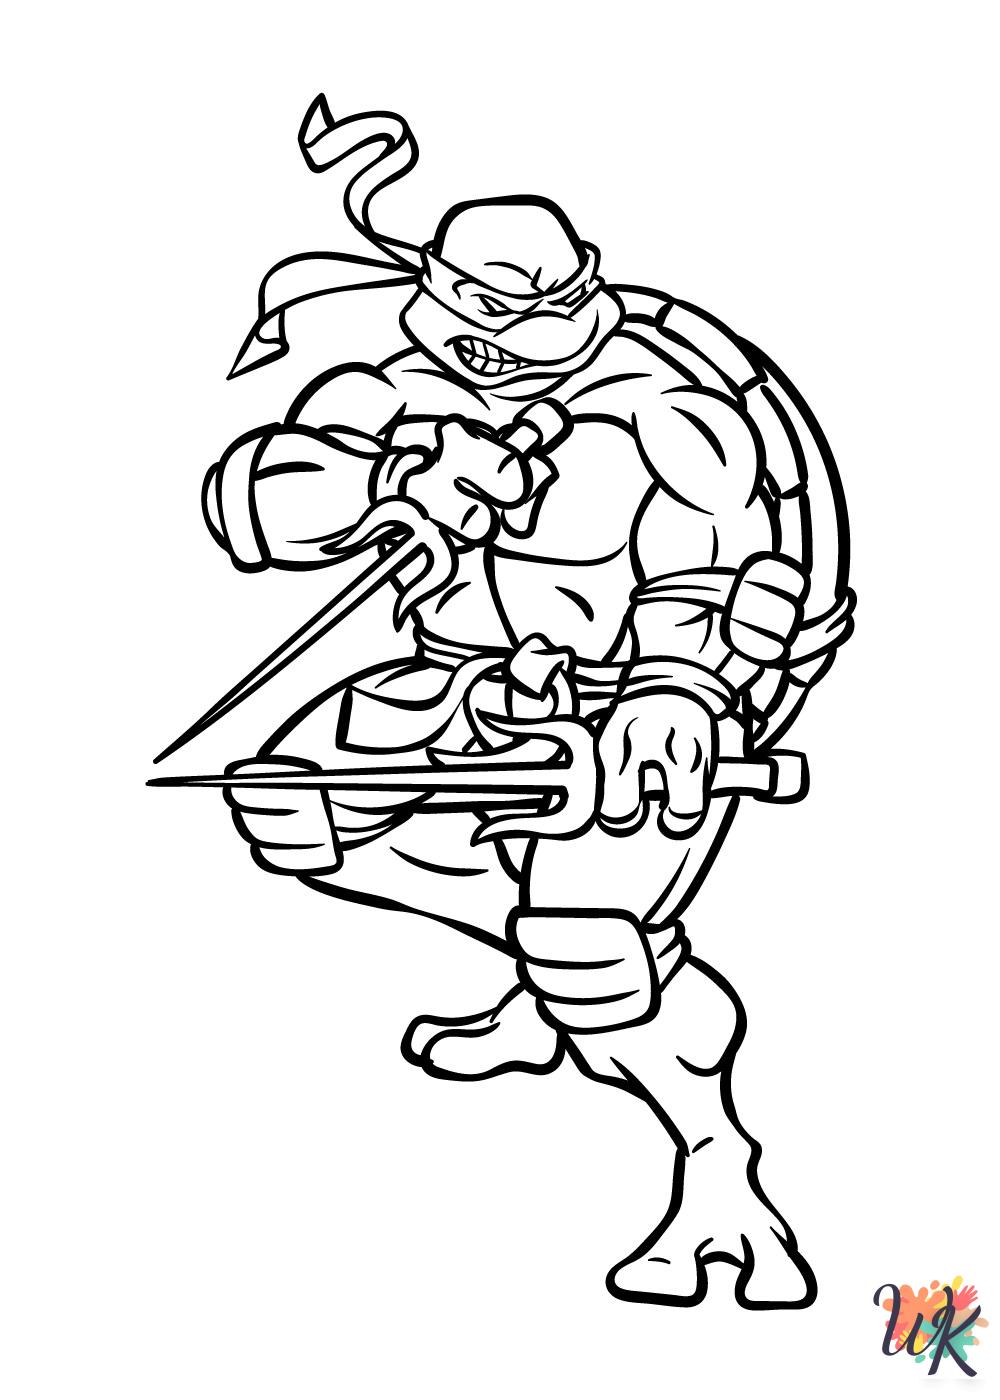 Ninja Turtles ornament coloring pages